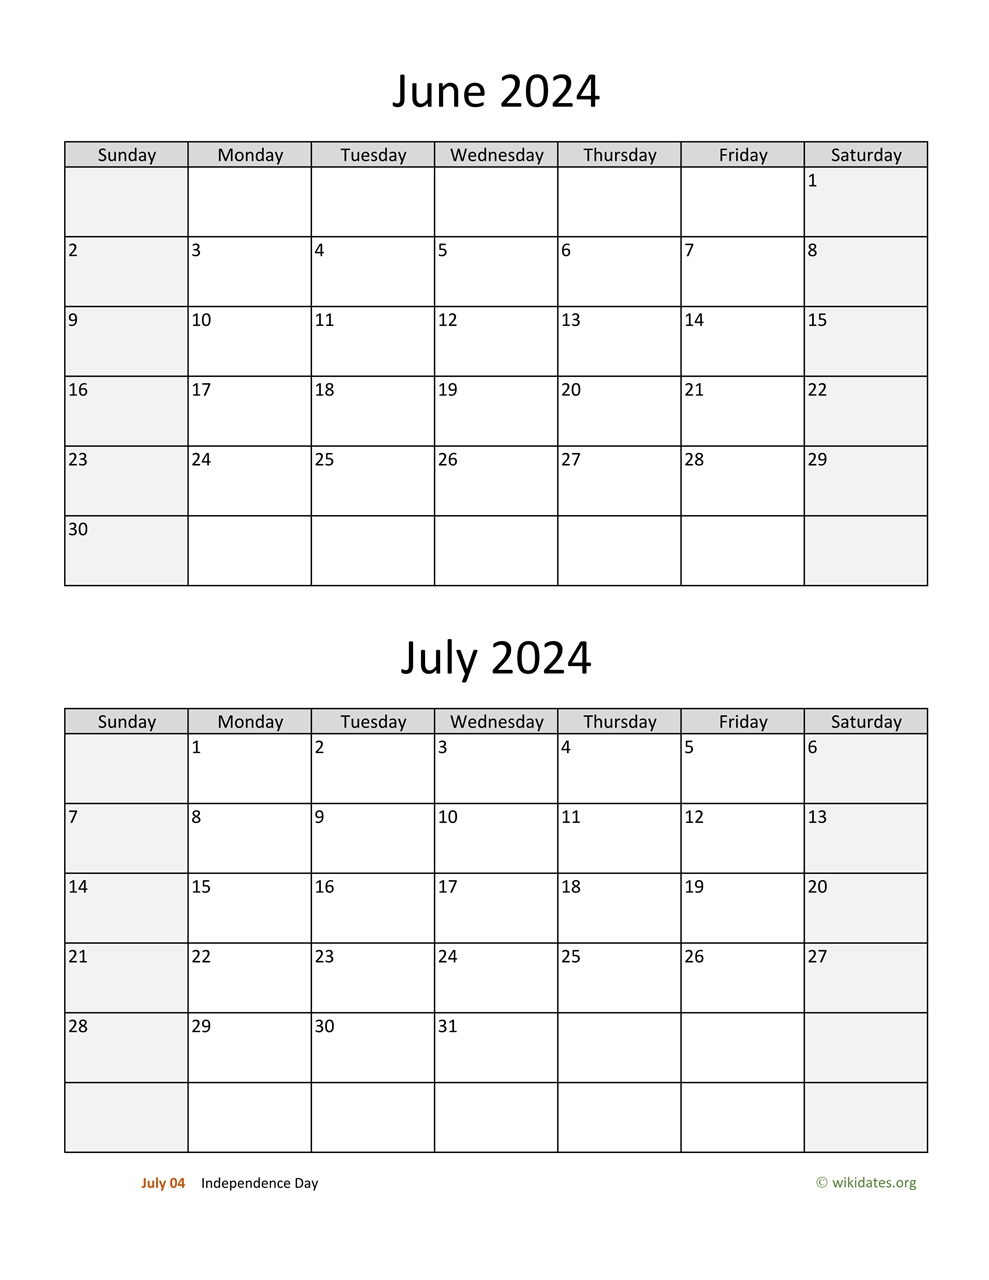 June And July 2024 Calendar | Wikidates for June And July Printable Calendar 2024